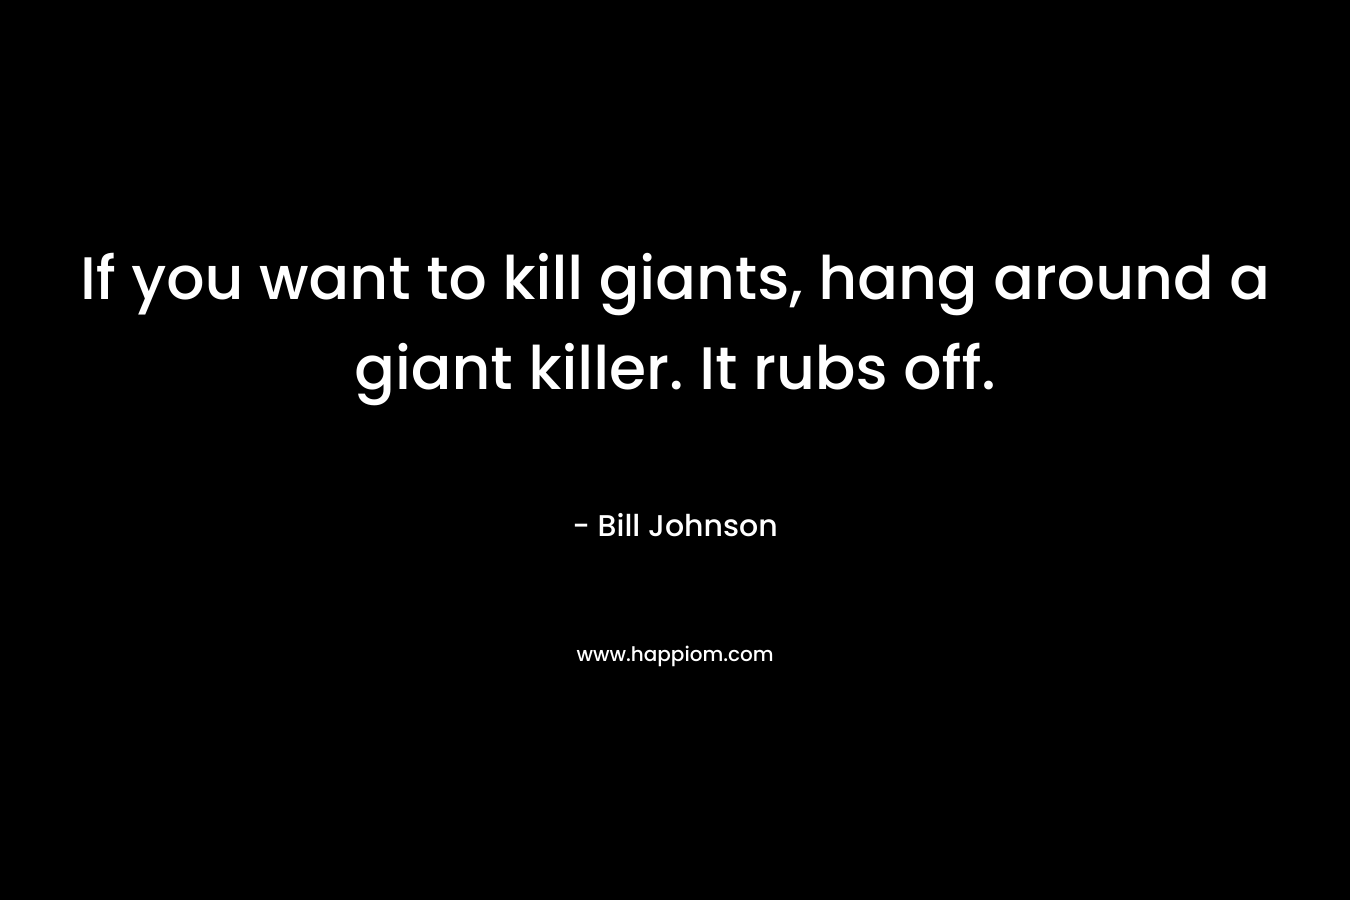 If you want to kill giants, hang around a giant killer. It rubs off. – Bill Johnson